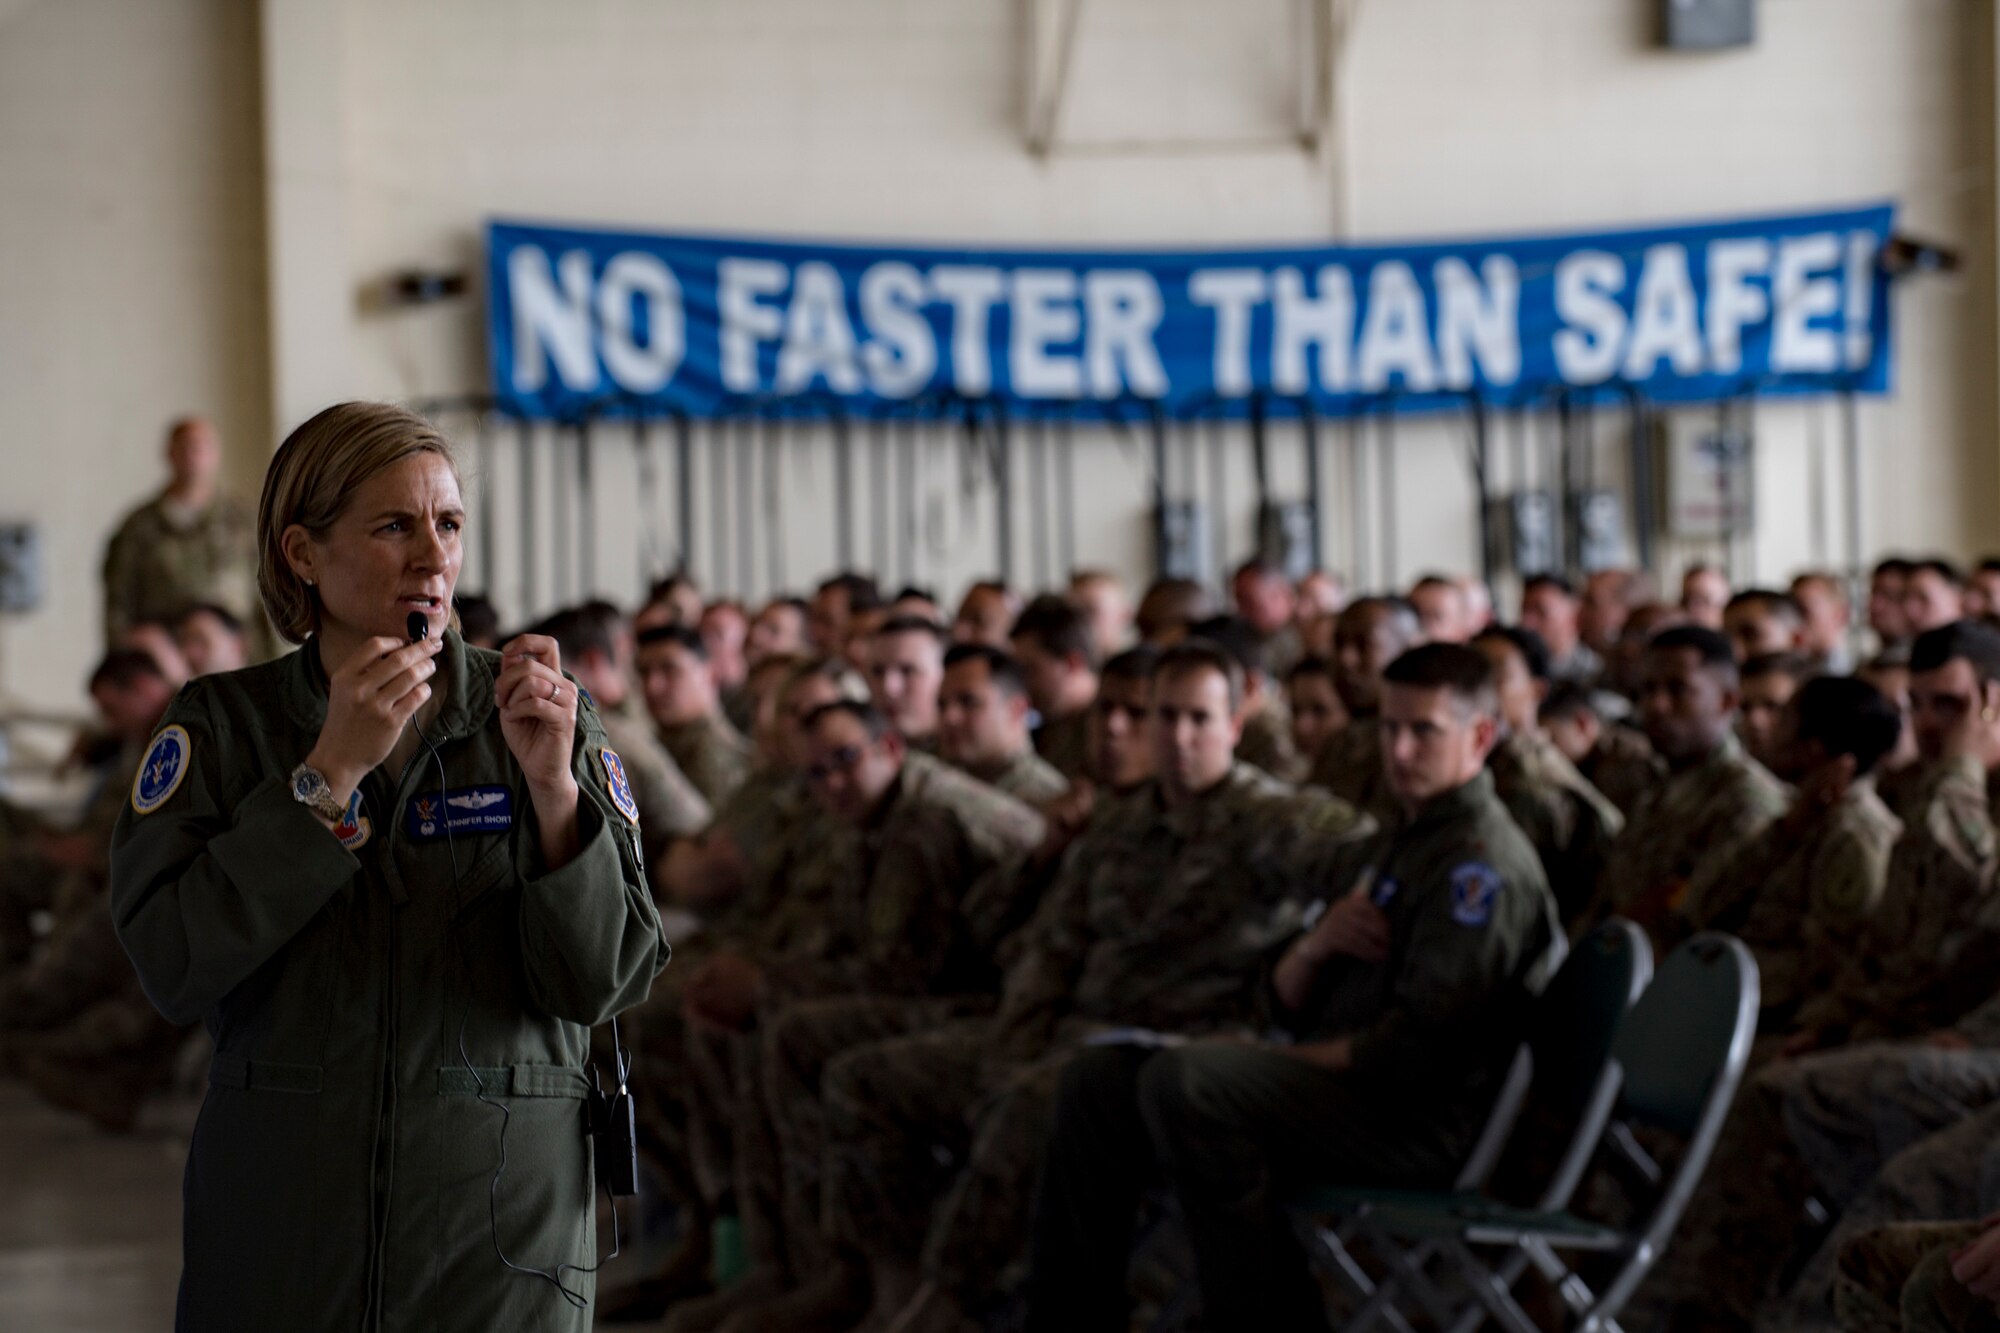 Col. Jennifer Short, 23d Wing commander, addresses Airmen from Team Moody’s operations and maintenance units during a one-day operational safety review, May 14, 2018, at Moody Air Force Base, Ga. During the safety review, the commander-led forum gathered feedback from Airmen who execute the Air Force's flying and maintenance operations and challenged them to identify issues that may cause a future mishap. (U.S. Air Force photo by Senior Airman Daniel Snider)